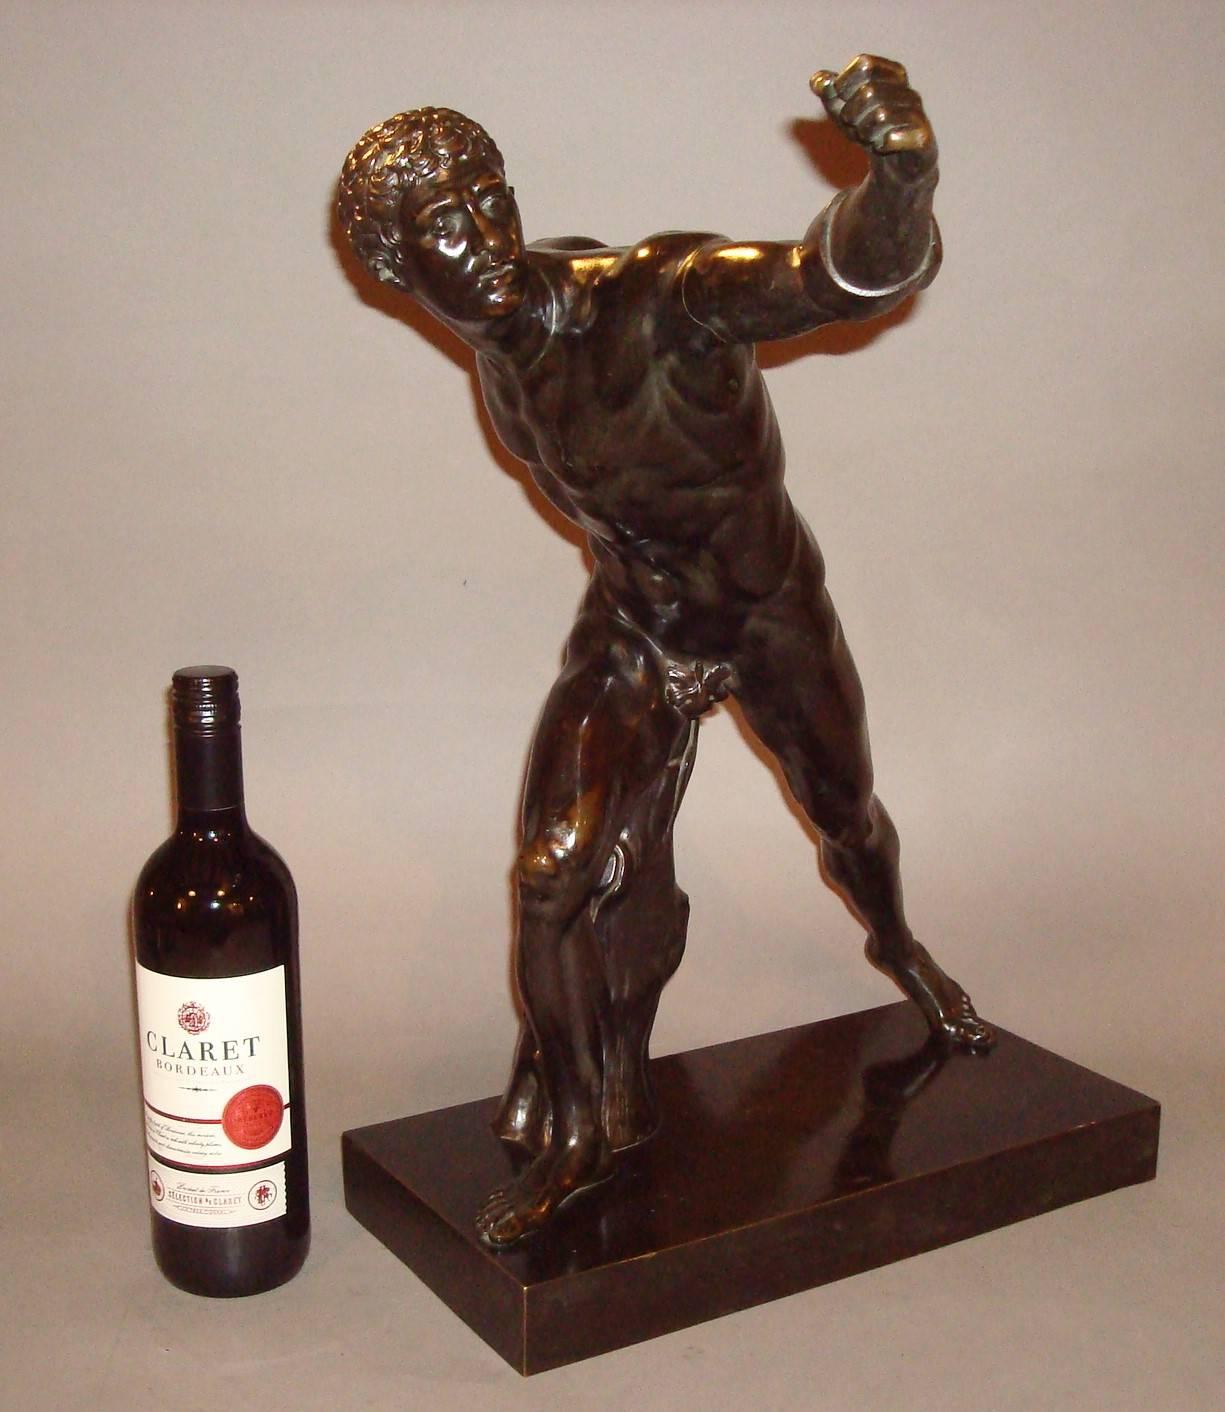 19th century Grand Tour, classical bronze figure of the Borghese Gladiator of large proportions. Standing on a bronze rectangular plinth. The good dark patination emphasizes his well sculpted muscles; and Fine quality chase work to his face and